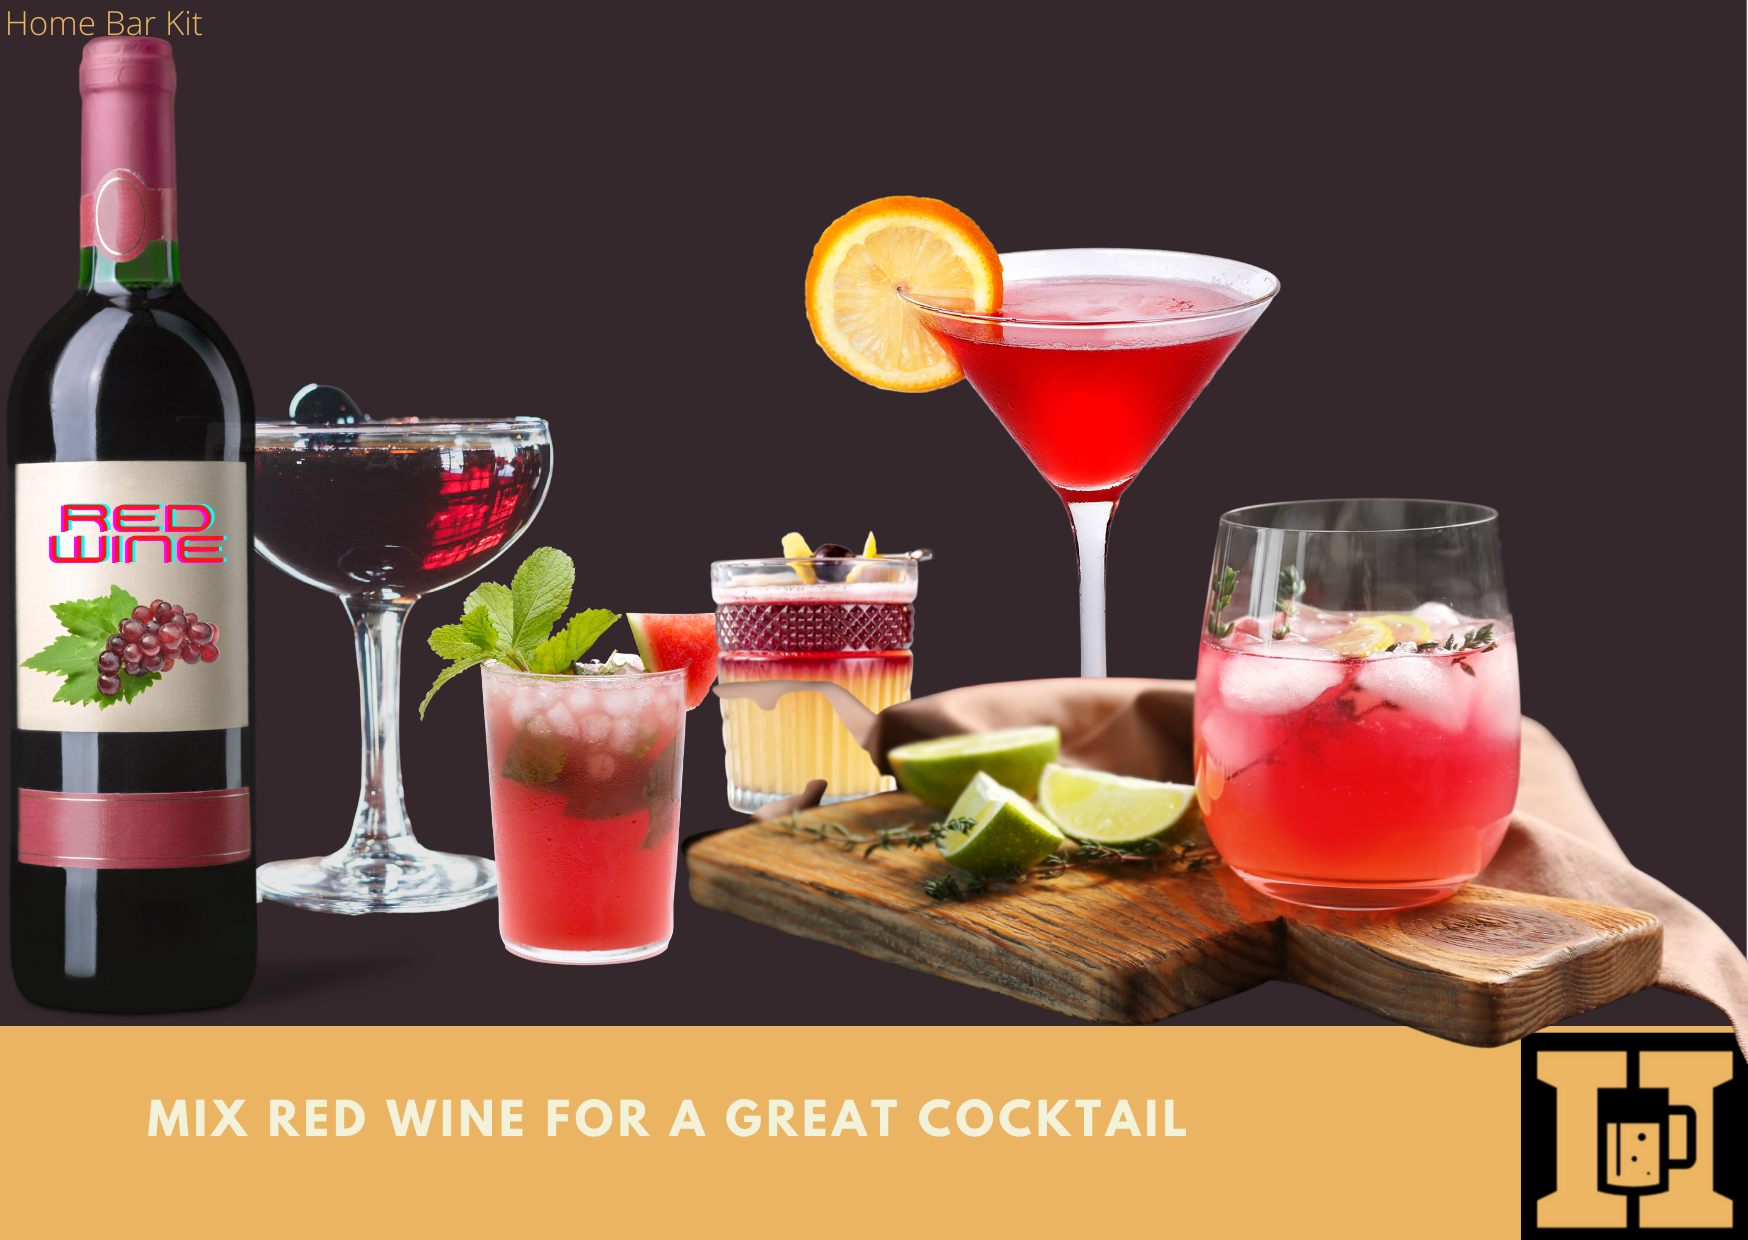 What Can I Mix Red Wine With For A Great Cocktail